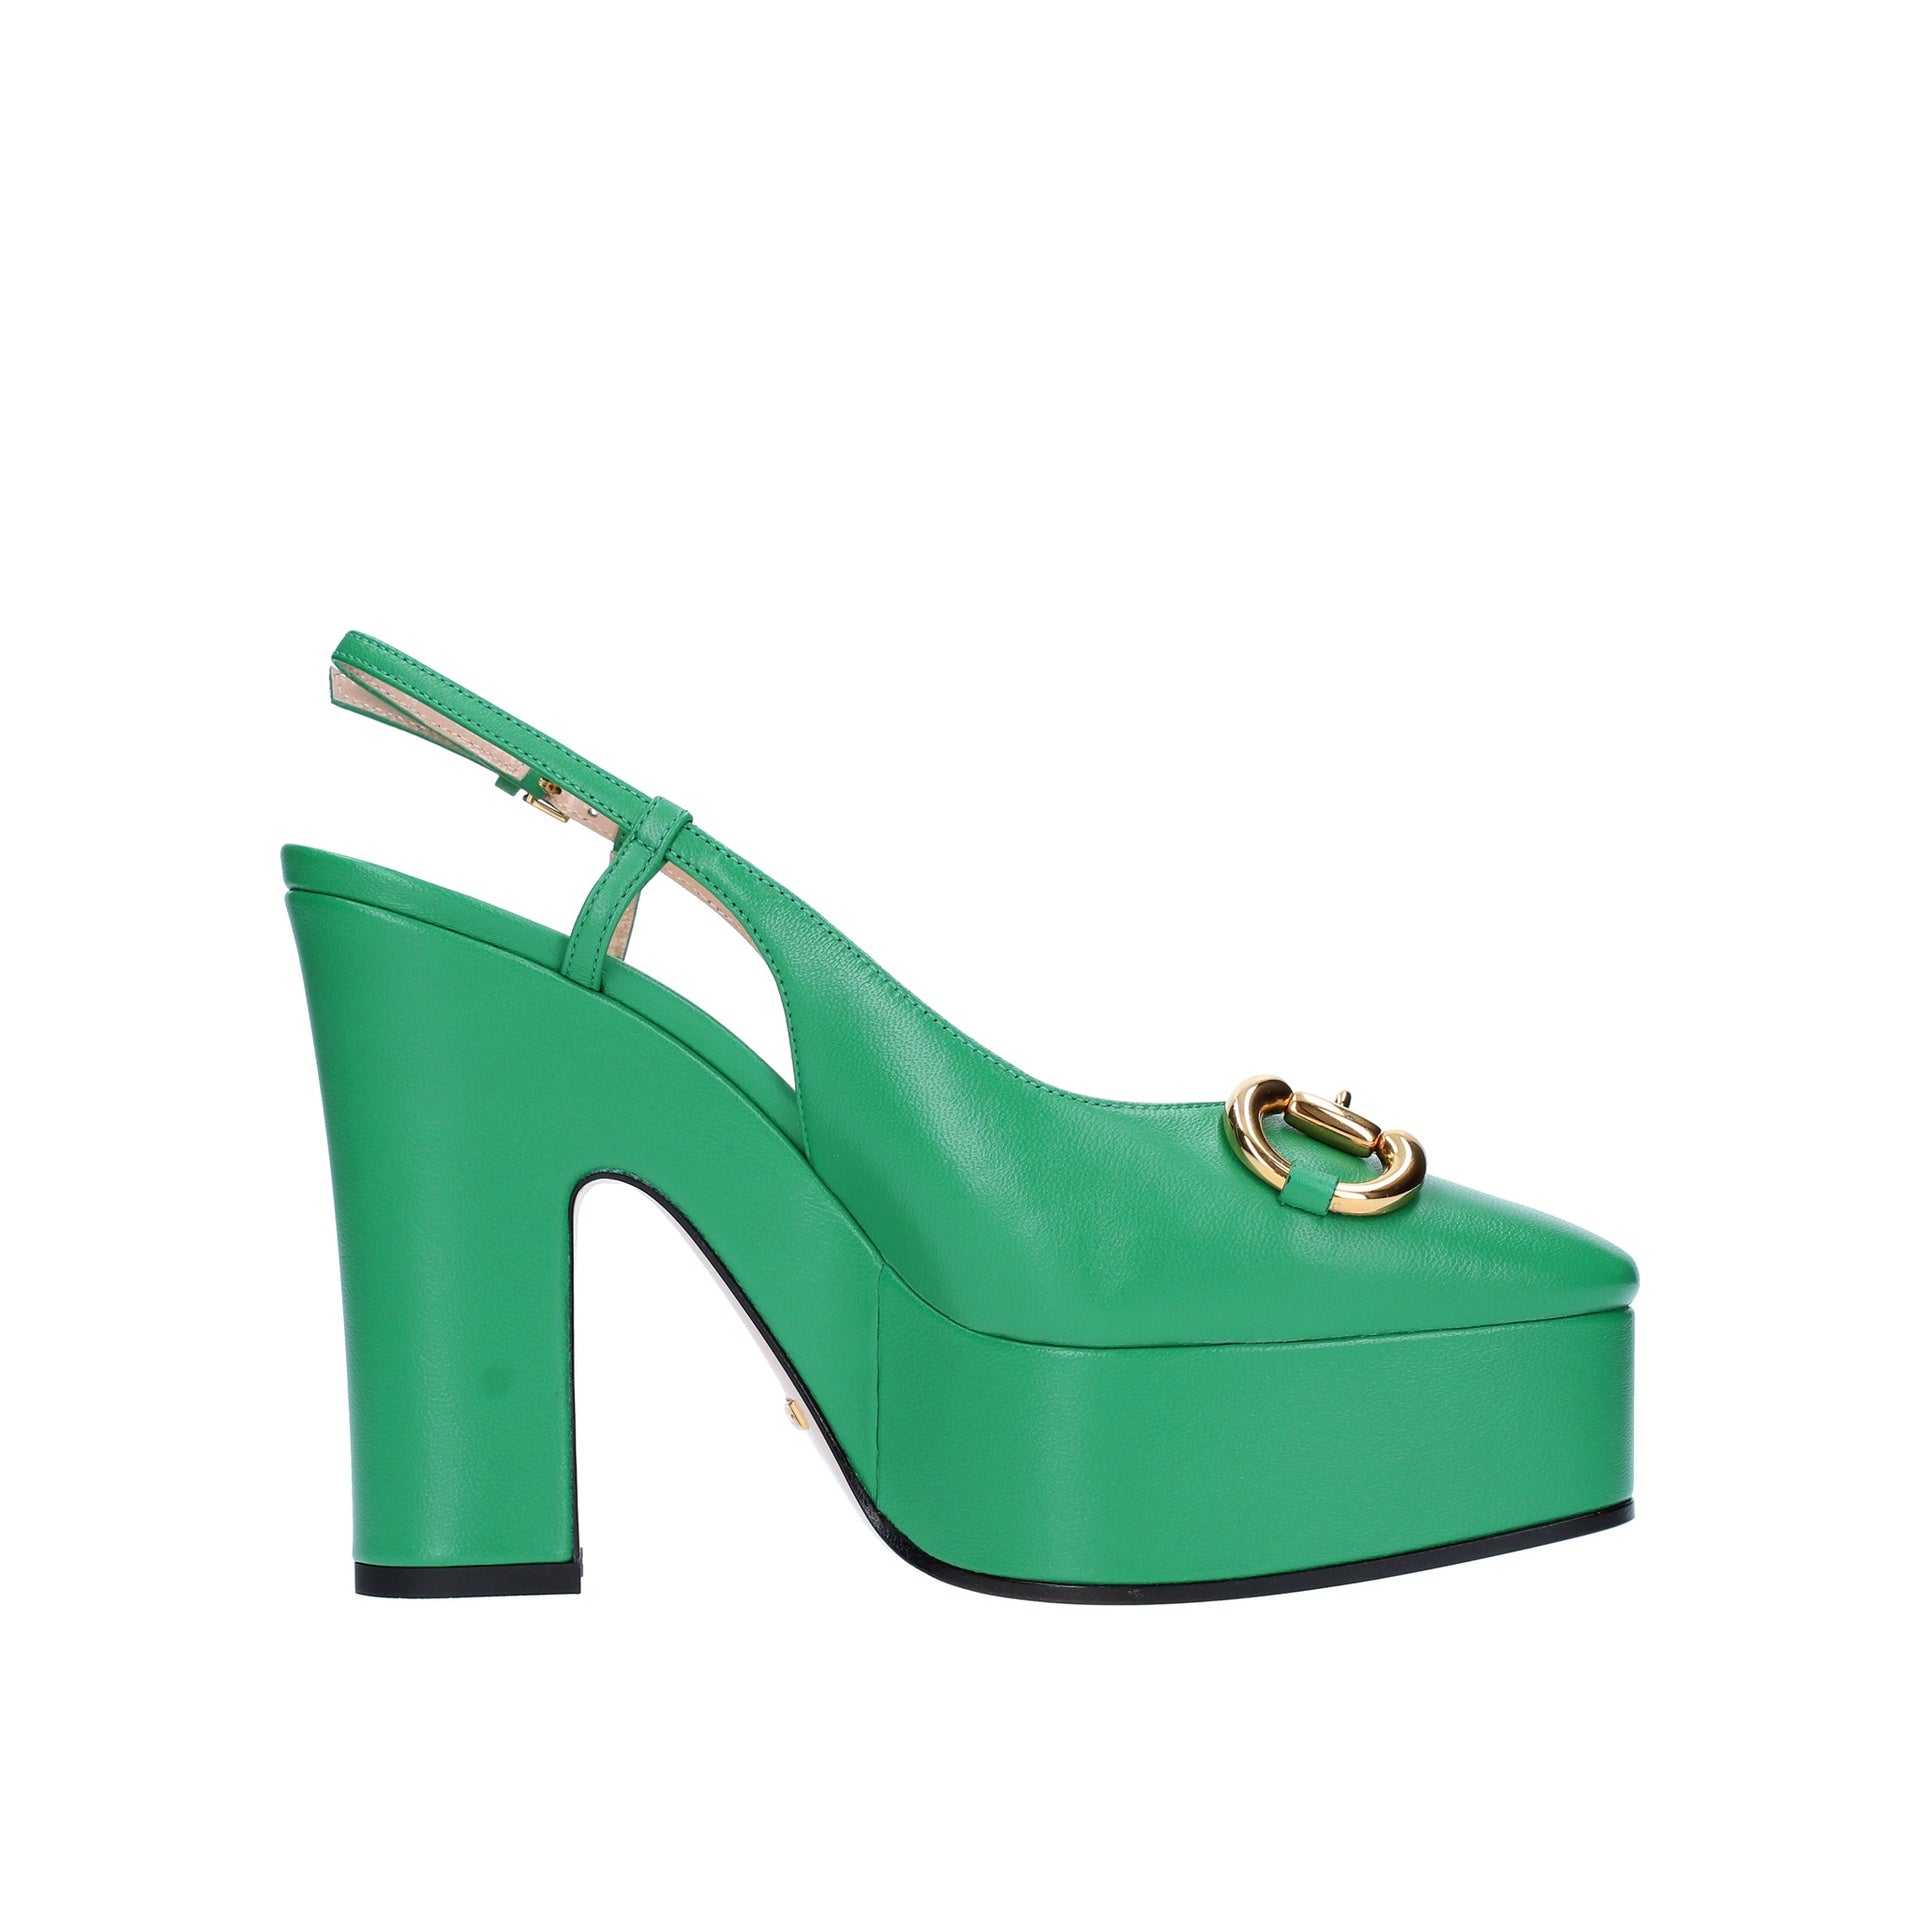 GUCCI-OUTLET-SALE-Gucci-Leather-Slingback-Pumps-Pumps-GREEN-36-ARCHIVE-COLLECTION.jpg